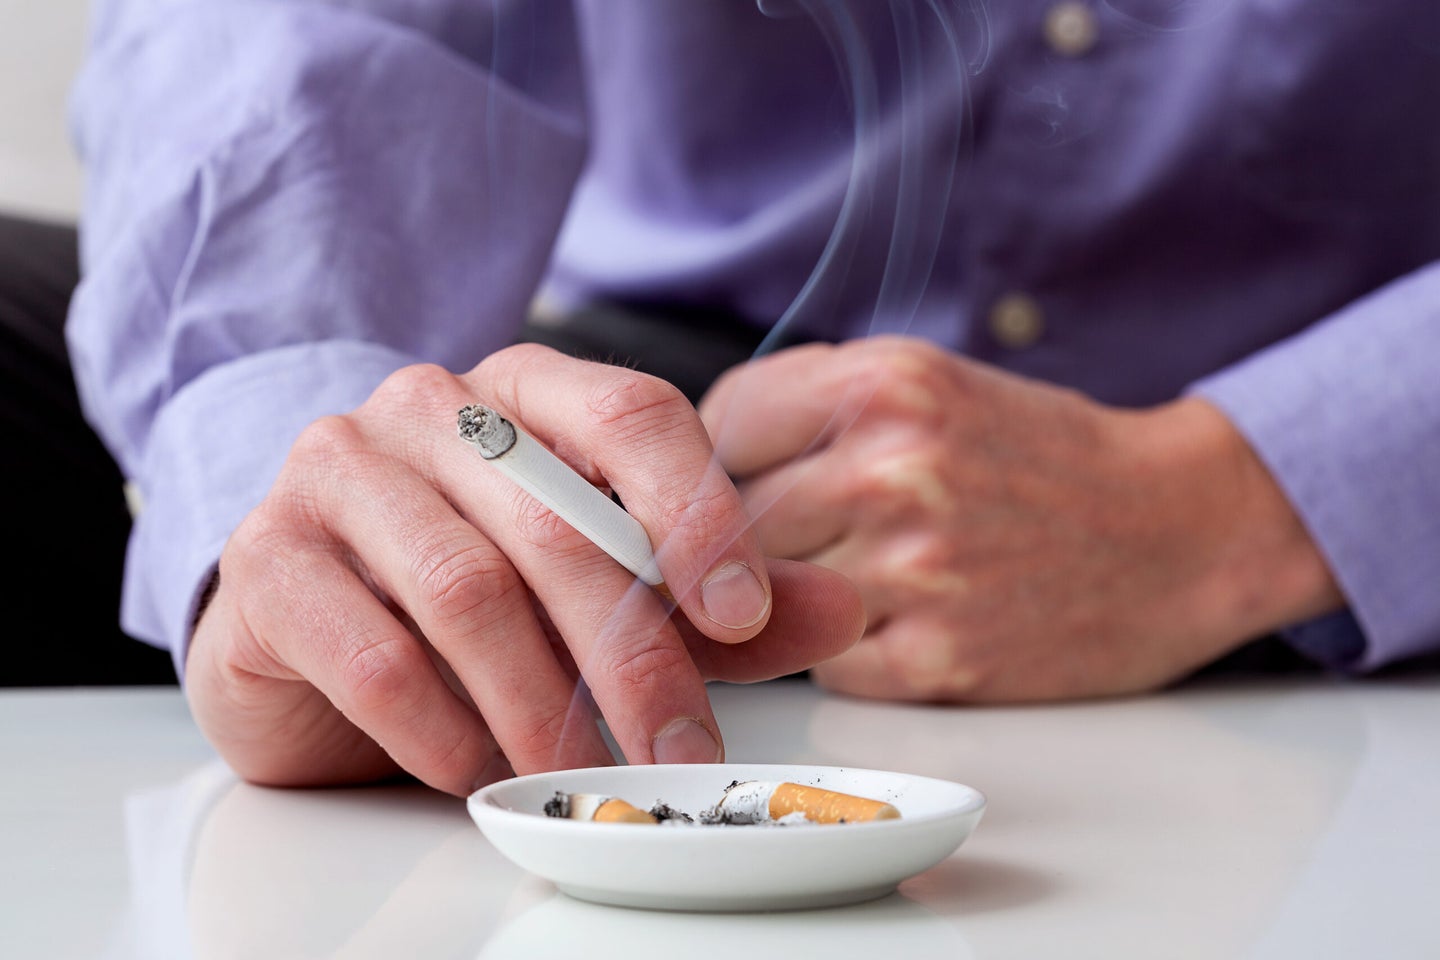 Pleasant scents might help you quit smoking